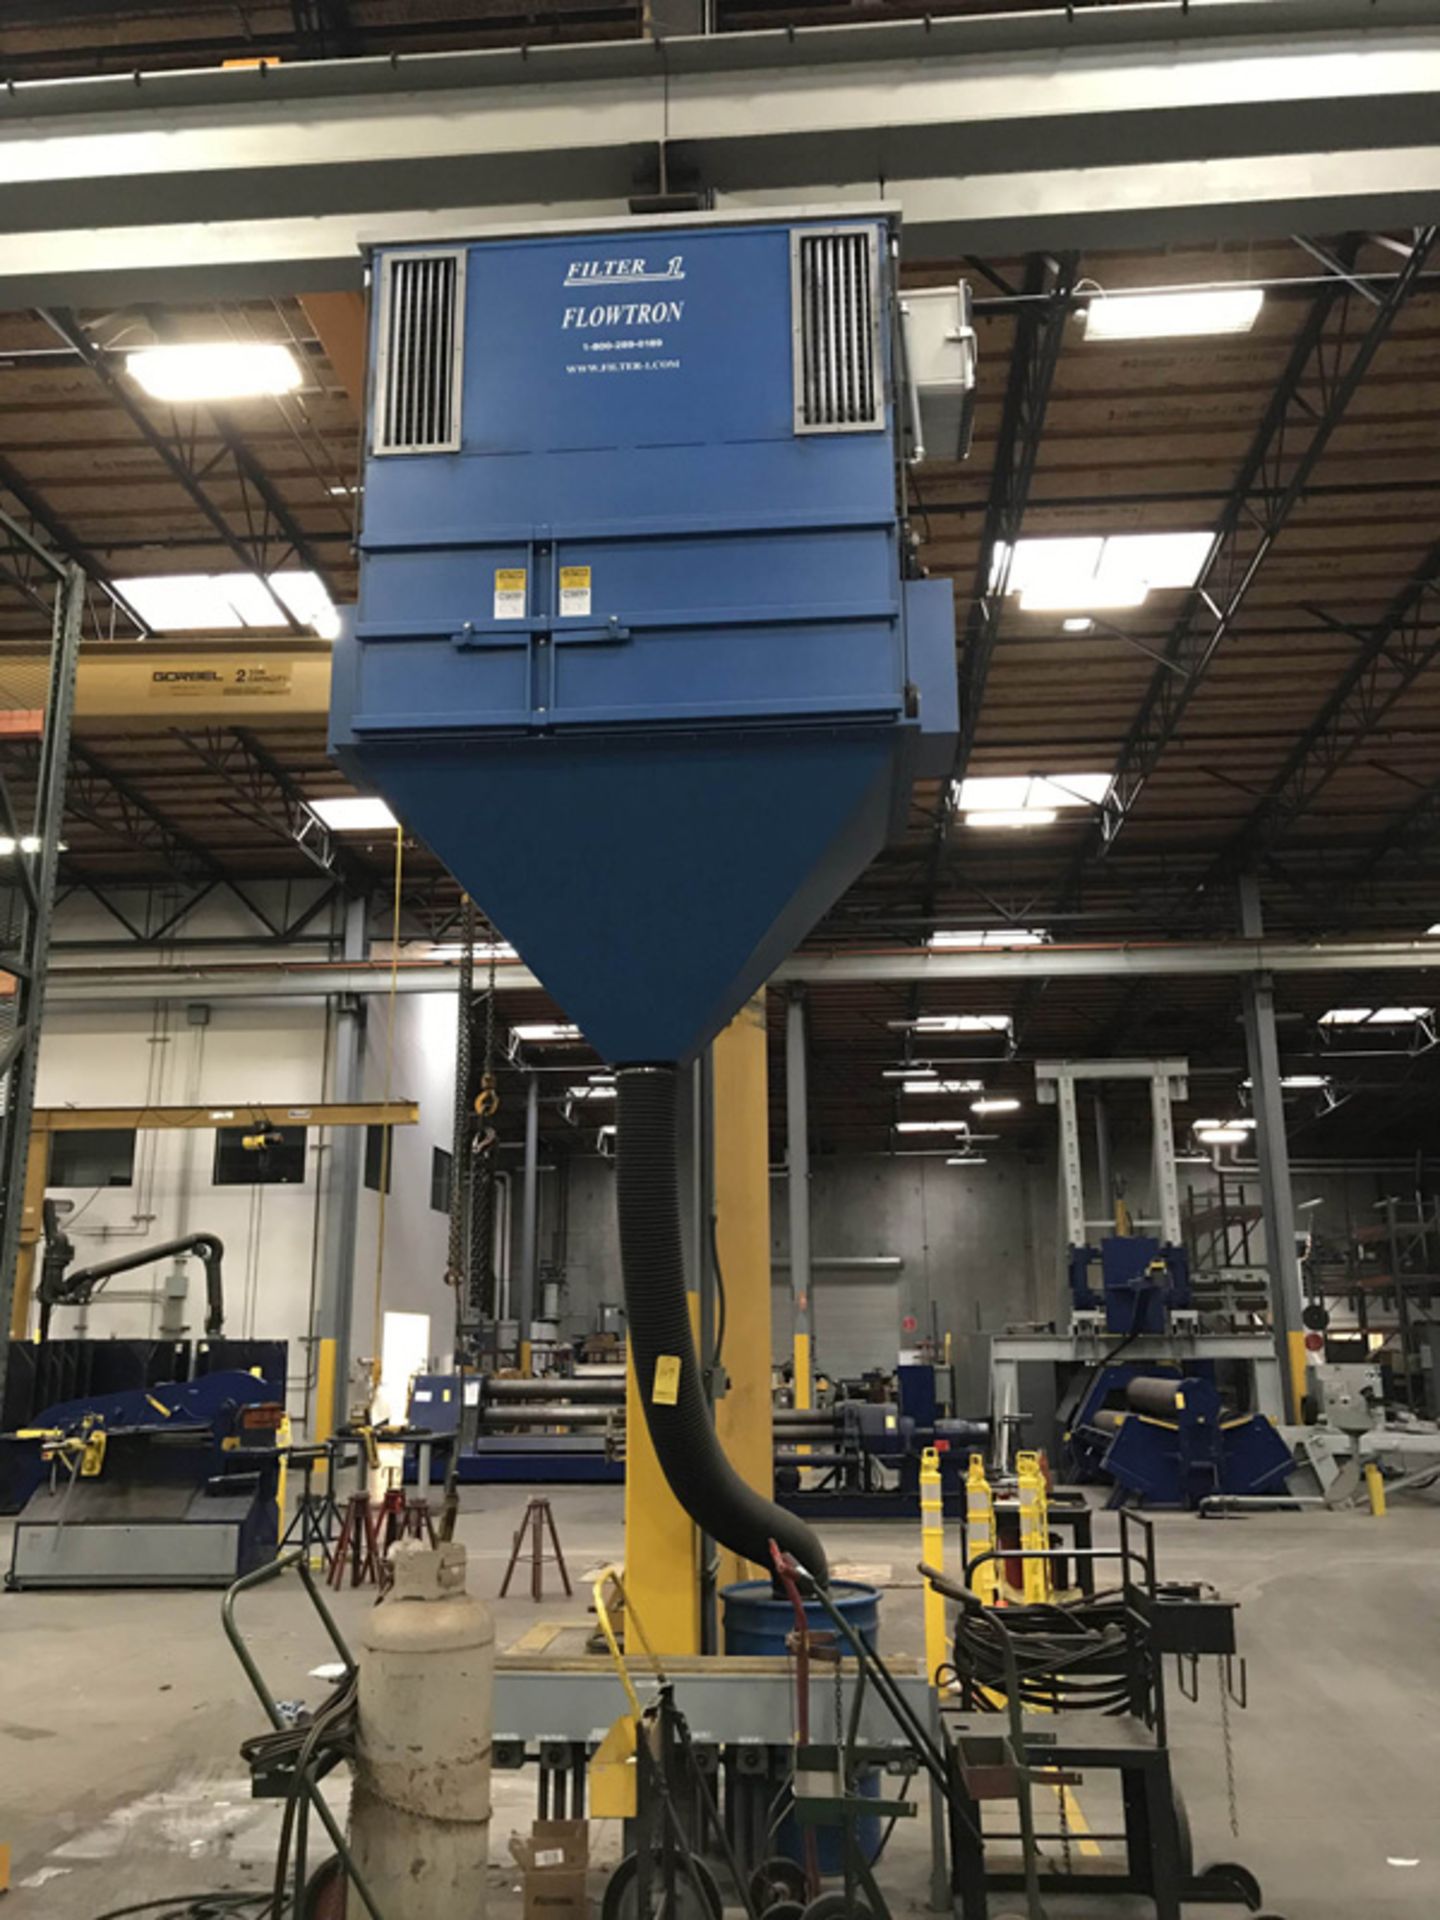 2013 Flowtron Filter 1 Dust Collector | 8,500 CFM, Located In: Huntington Park, CA - 7913